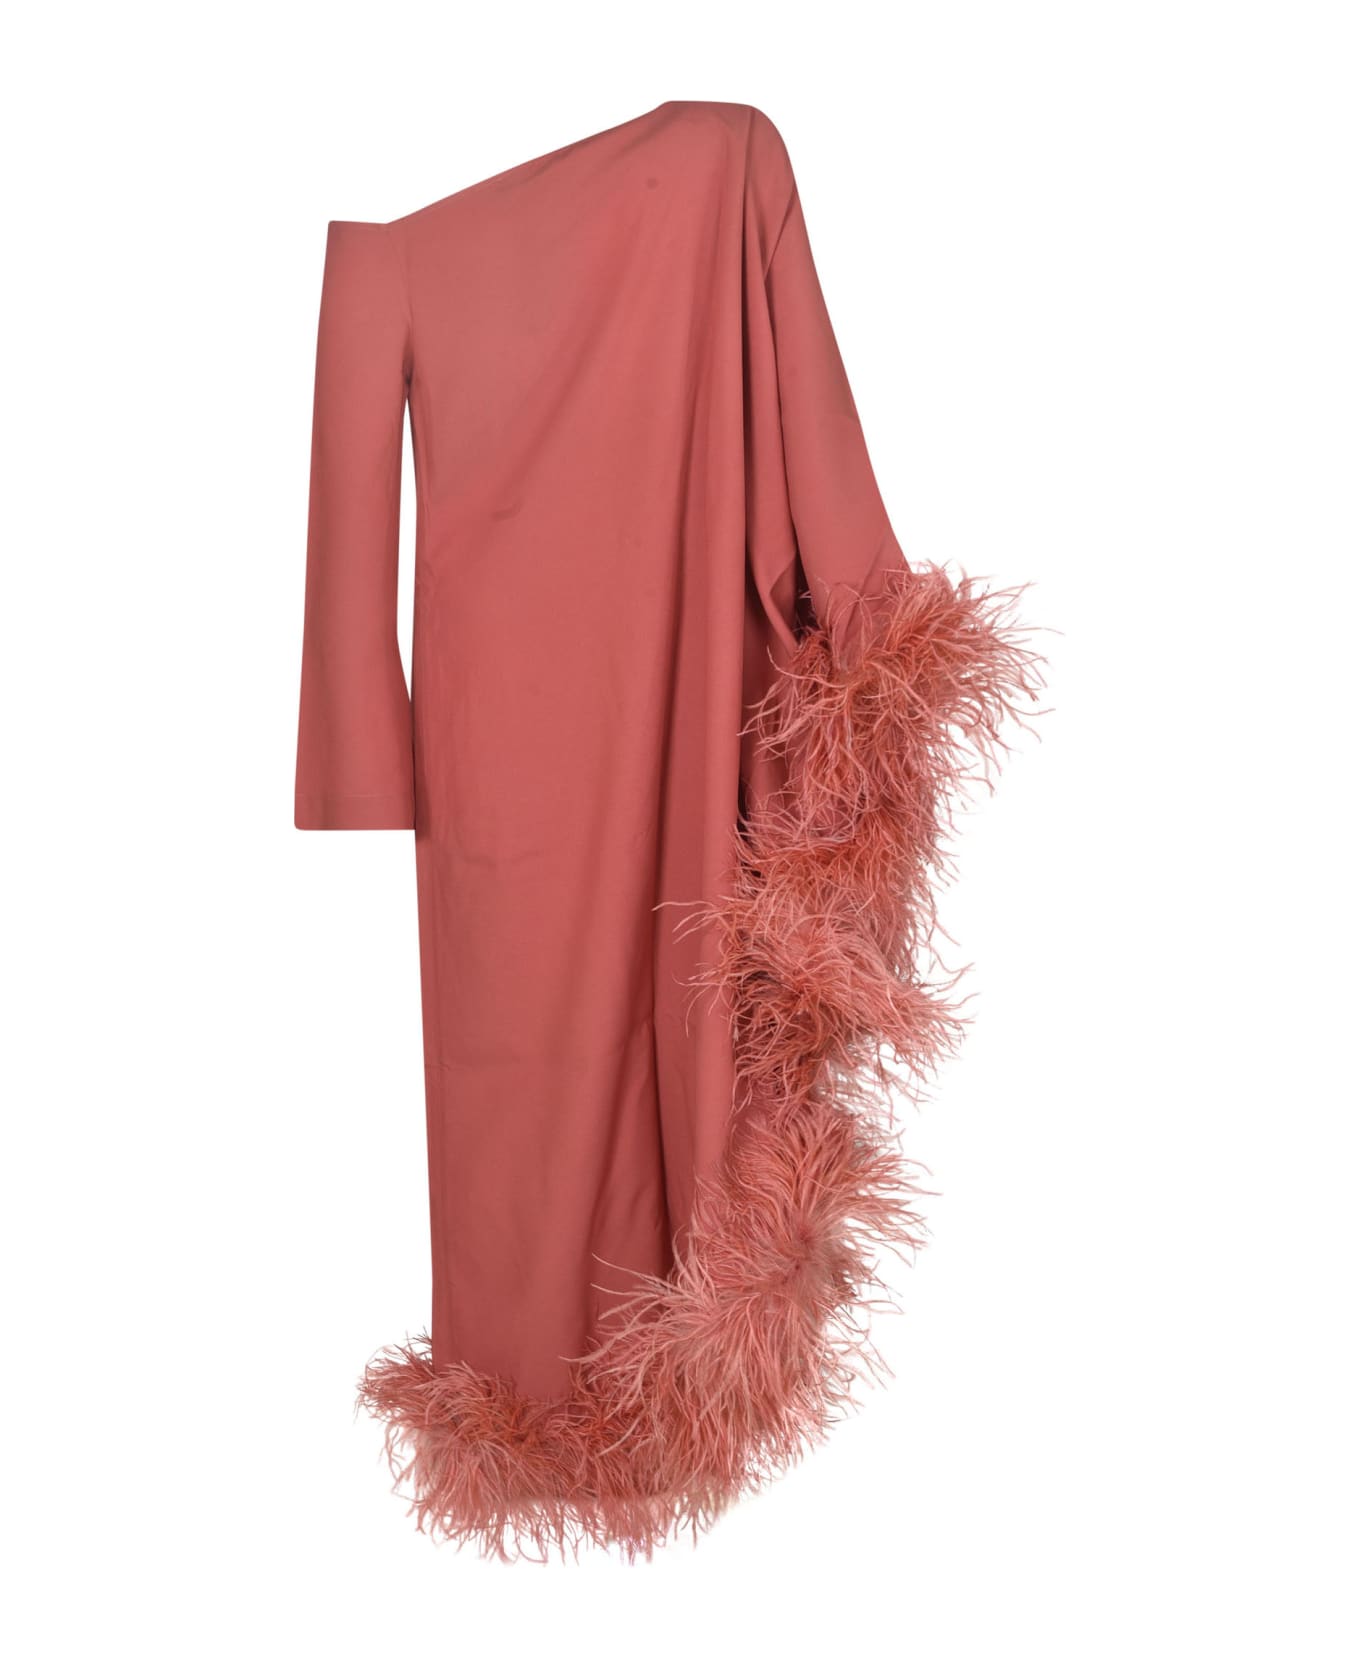 Taller Marmo Feathered Cuff One-shoulder Long Dress - PINK